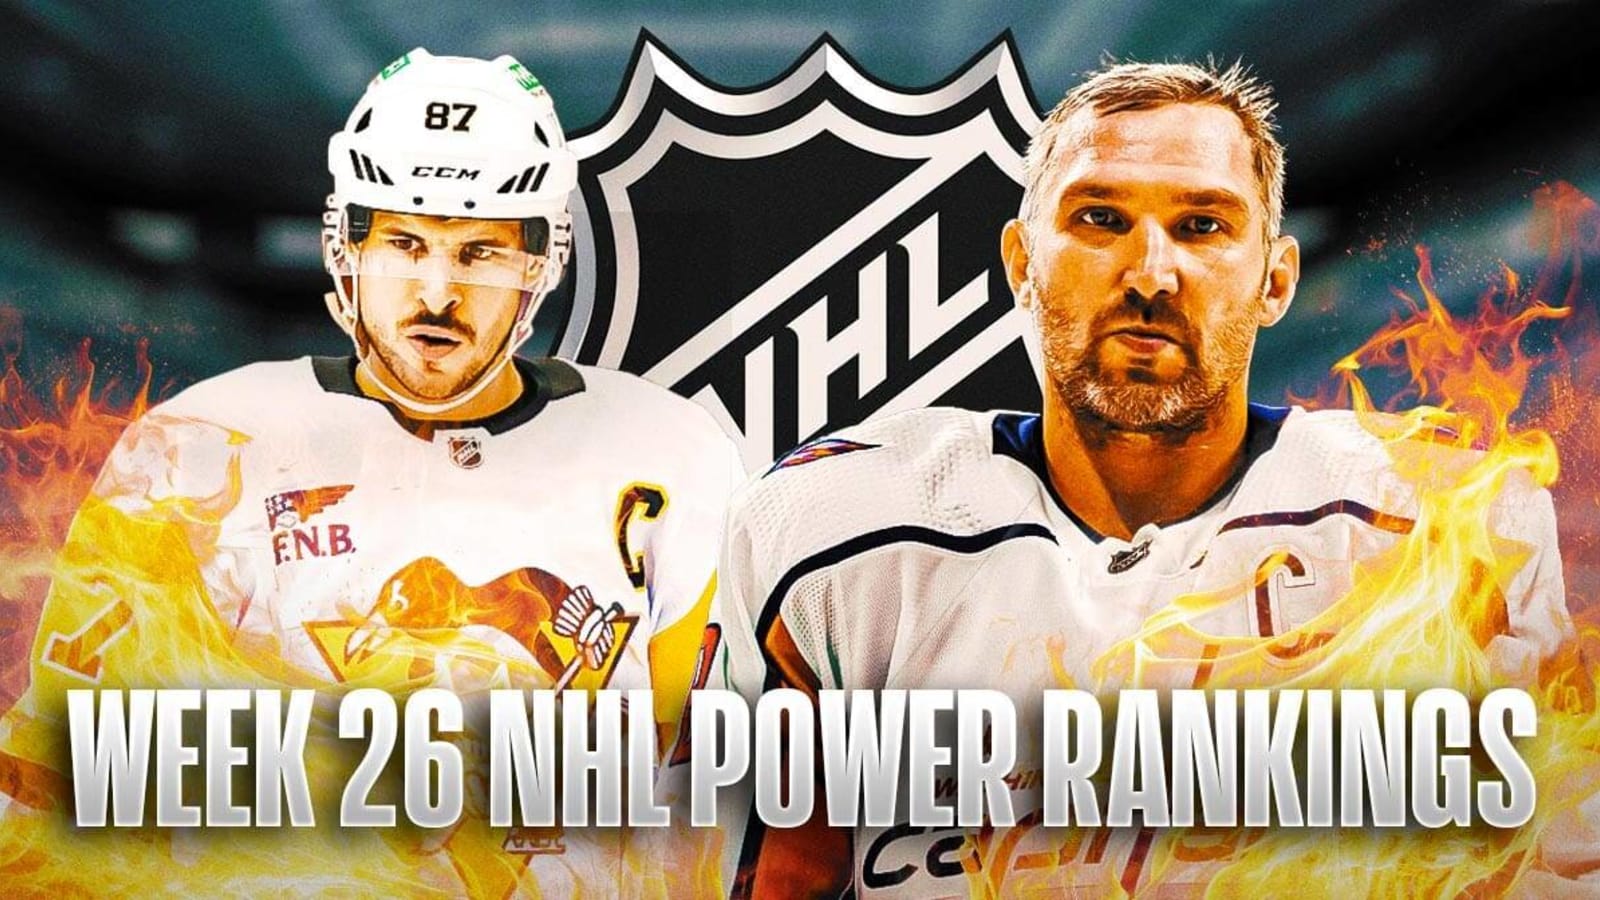 NHL Power Rankings, Week 26: Crosby, Ovechkin headline chaotic playoff chase